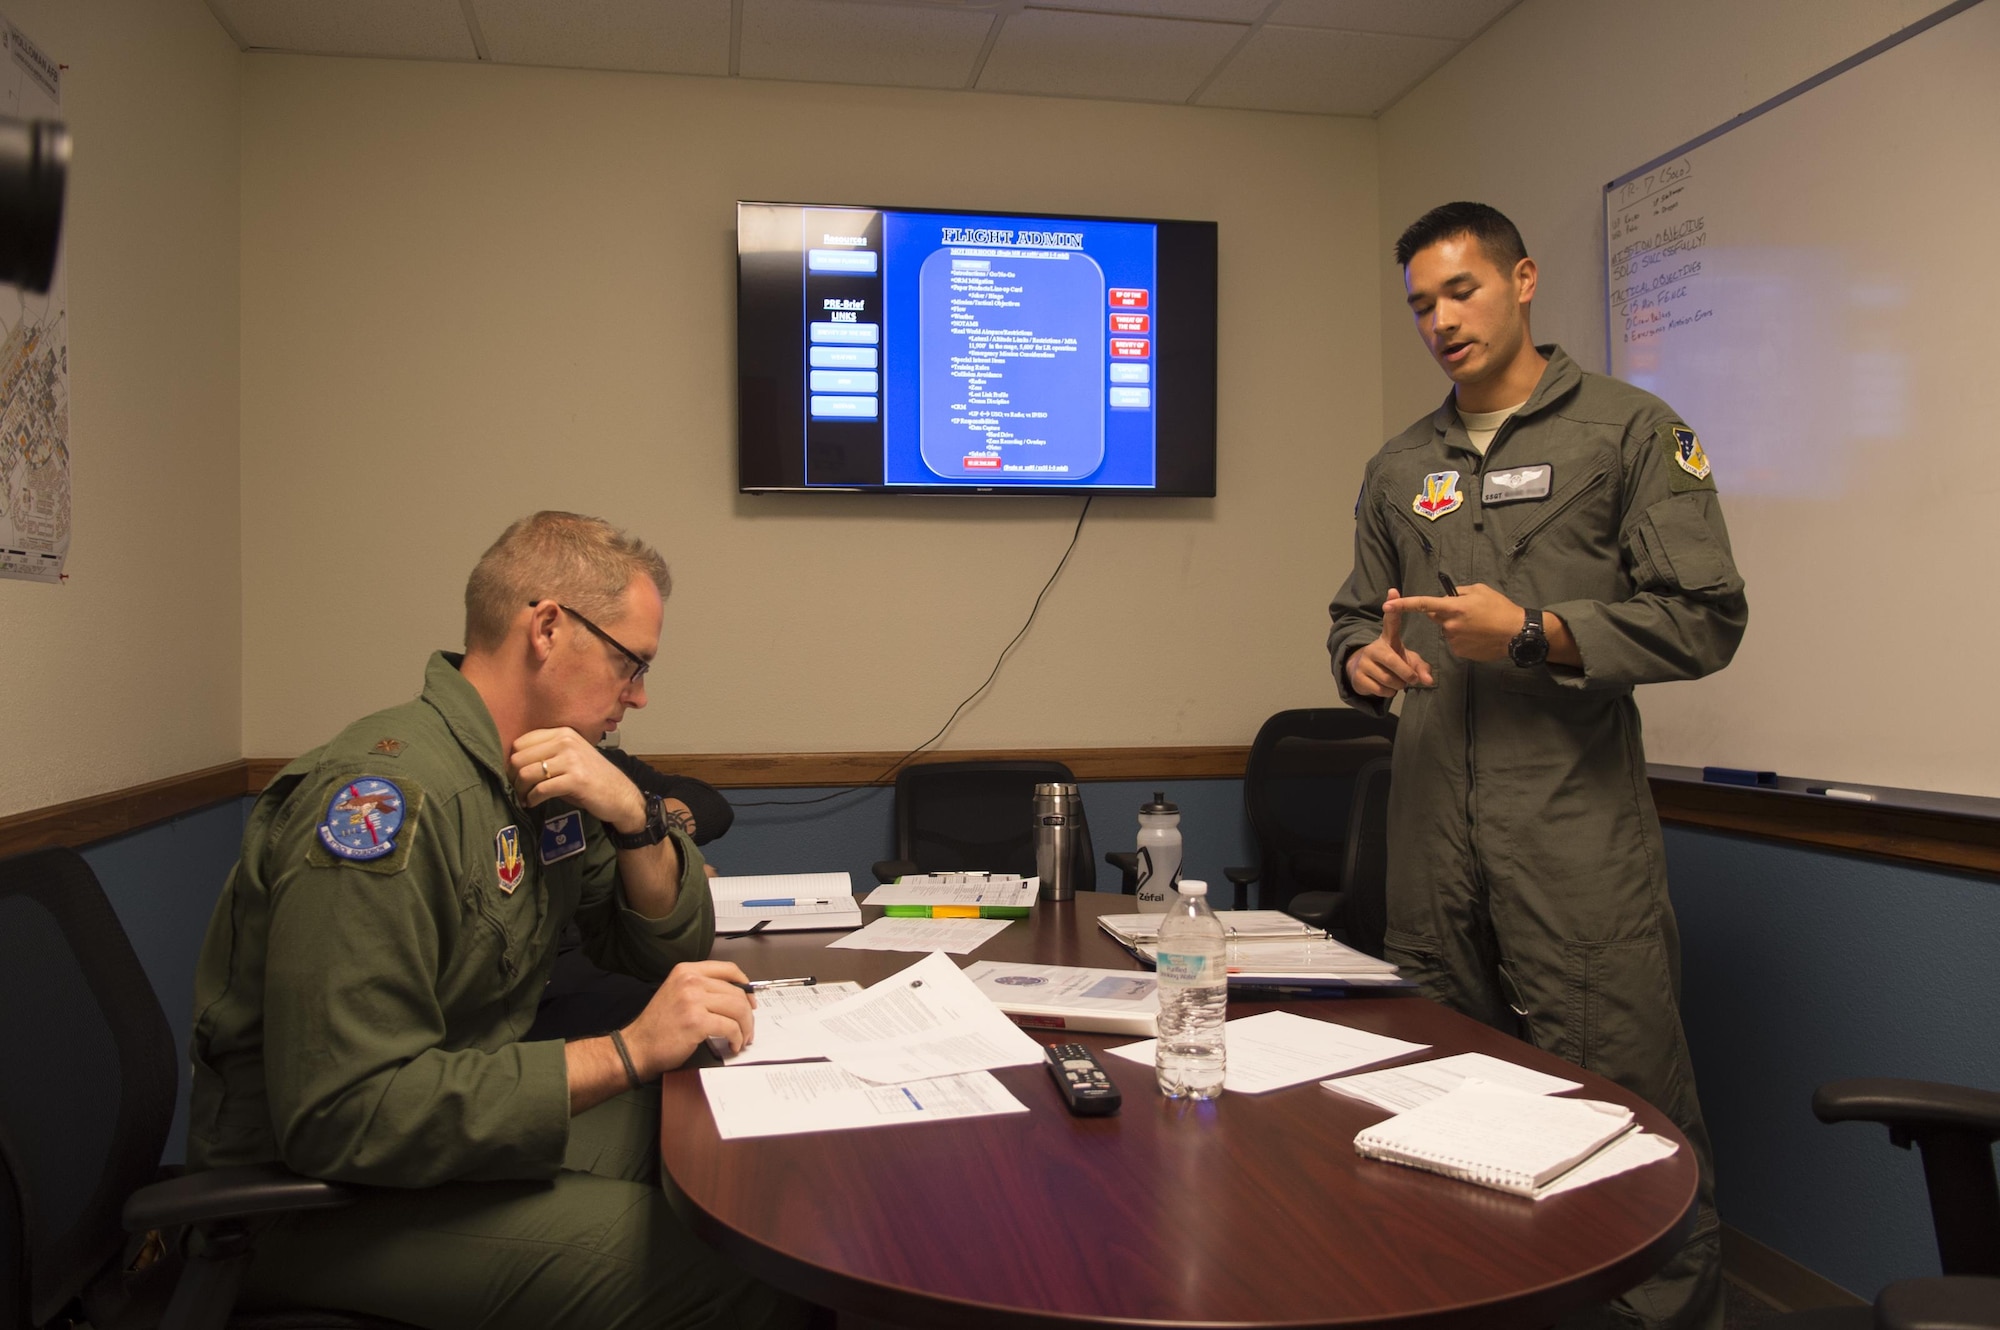 Maj. Jay, 6th Attack Squadron instructor pilot, receives a briefing from a student sensor operator prior to the first solo flight for the aircrew at Holloman Air Force Base, N.M., Nov. 7, 2017. Solo flights build confidence, airmanship and a crew mentality more than academic classroom discussion, or under direct instructor supervision in the cockpit. (U.S. Air Force photo by Tech. Sgt. Amanda Junk)